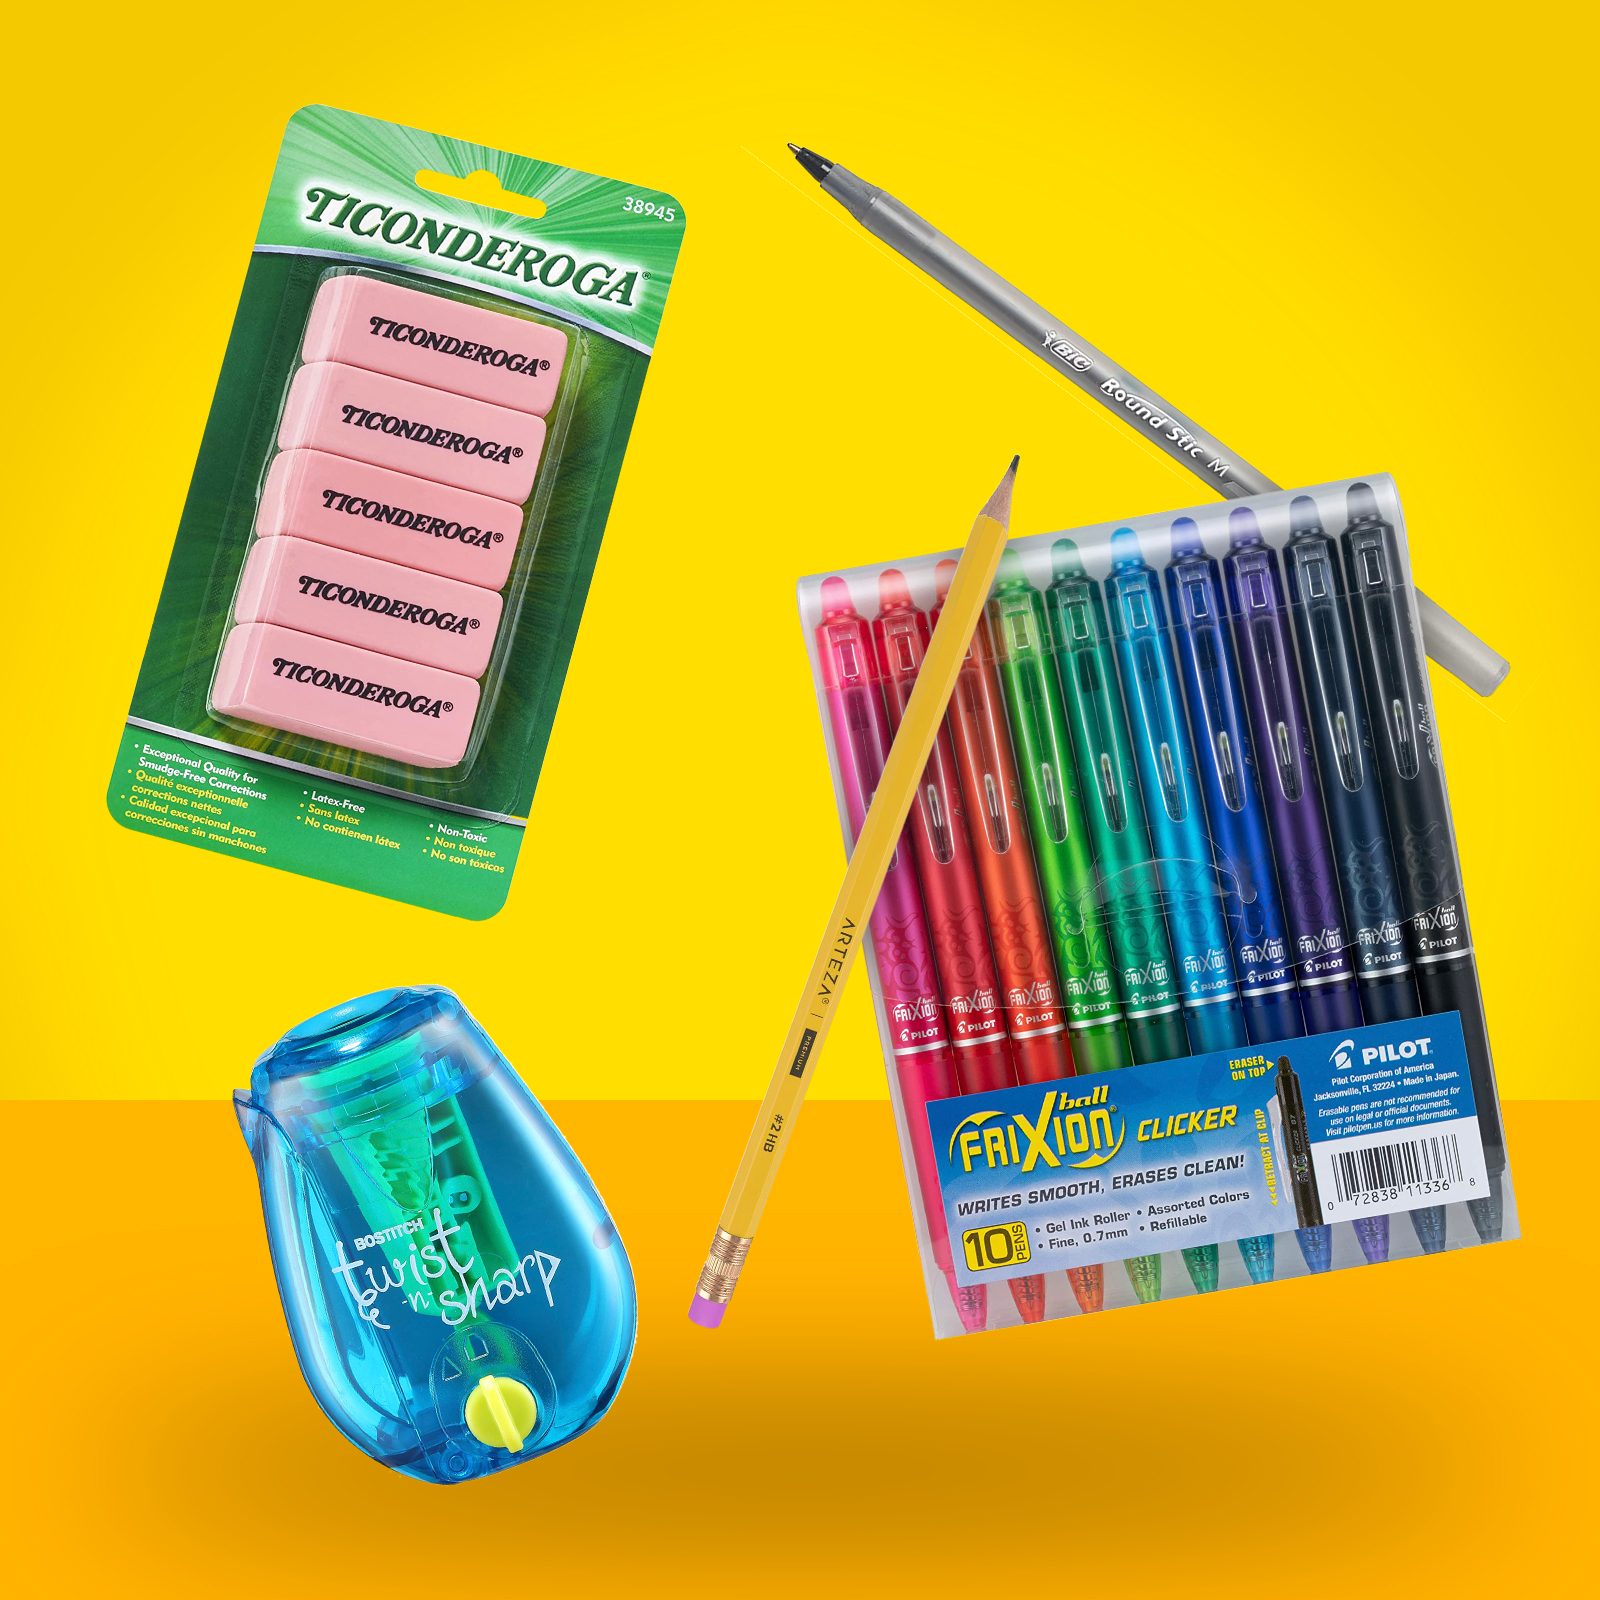 https://www.rd.com/wp-content/uploads/2022/07/60-Back-to-School-Supplies-Every-Student-Needs-1-Pens.jpg?fit=700%2C700